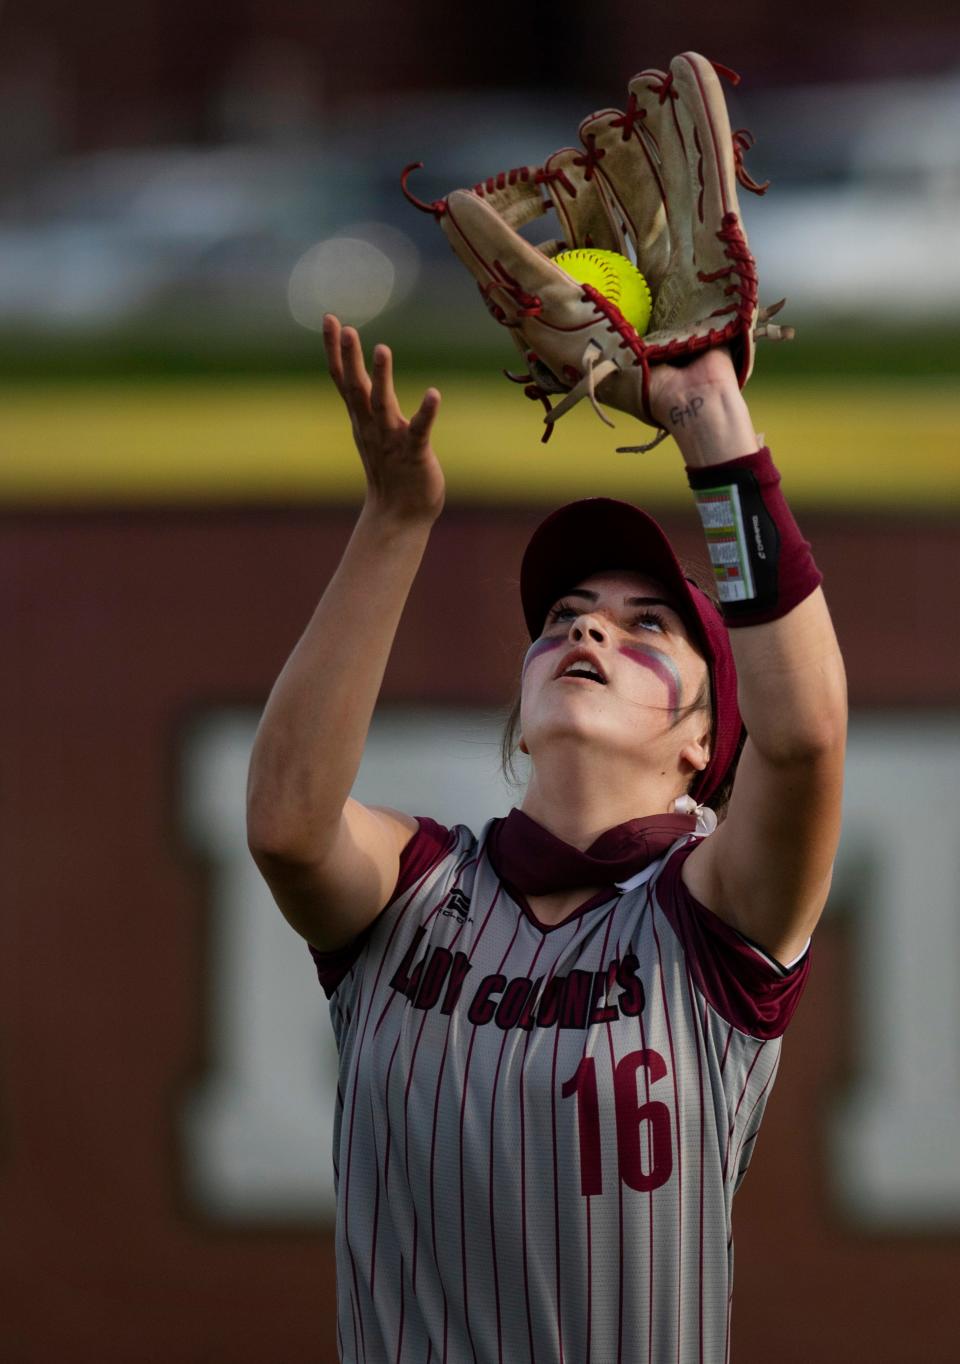 Henderson County's Taylor Troutman (16) hauls in a Castle fly ball at Henderson's North Field Monday evening, April 26, 2021.